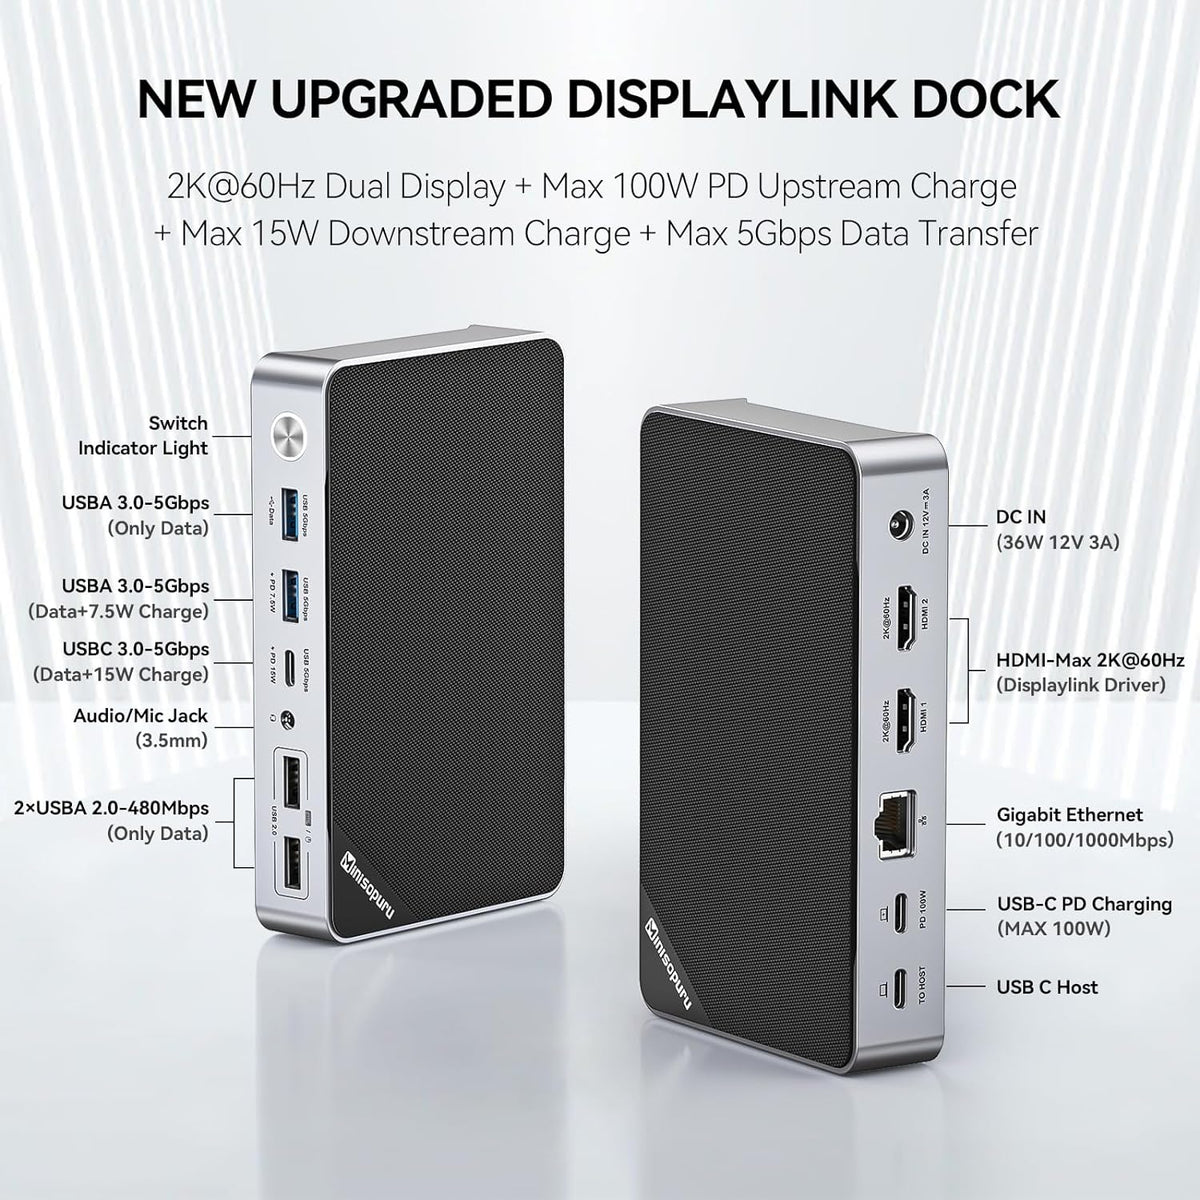 NEW UPGRADED DISPLAY 凵 NK DOCK 2K@60Hz DuaI DispIay + Max 100W PD Upstream Charge + Max 15W Downstream Charge + Max 5Gbps Data Transfer